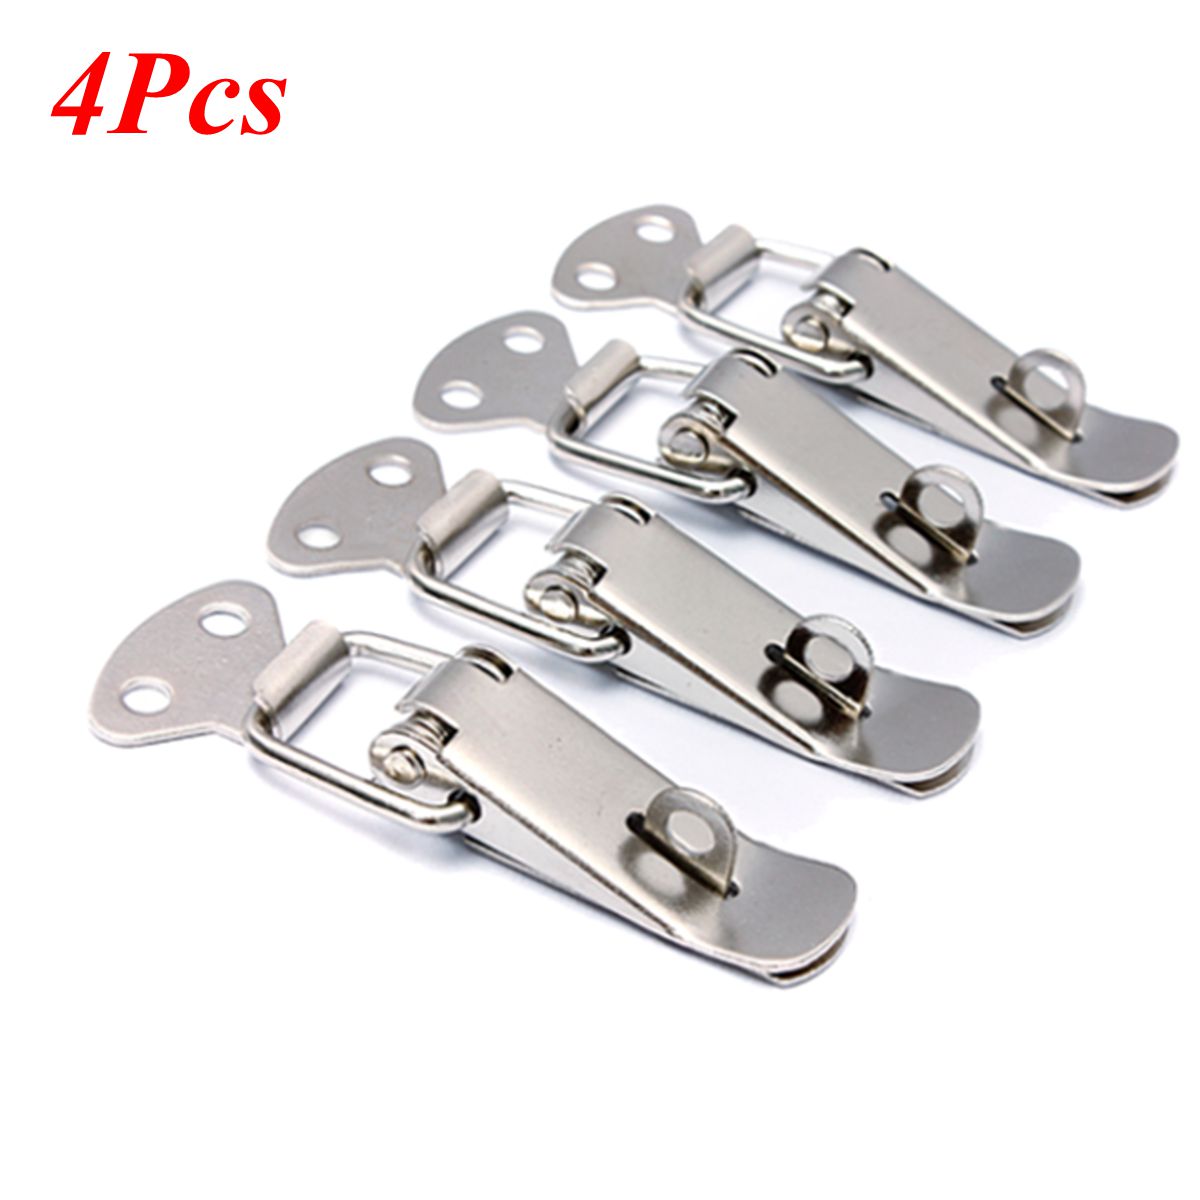 4PCS-Case-Box-Chest-Spring-Stainless-Tone-Lock-Toggle-Latch-Catch-Clasp-948011-2